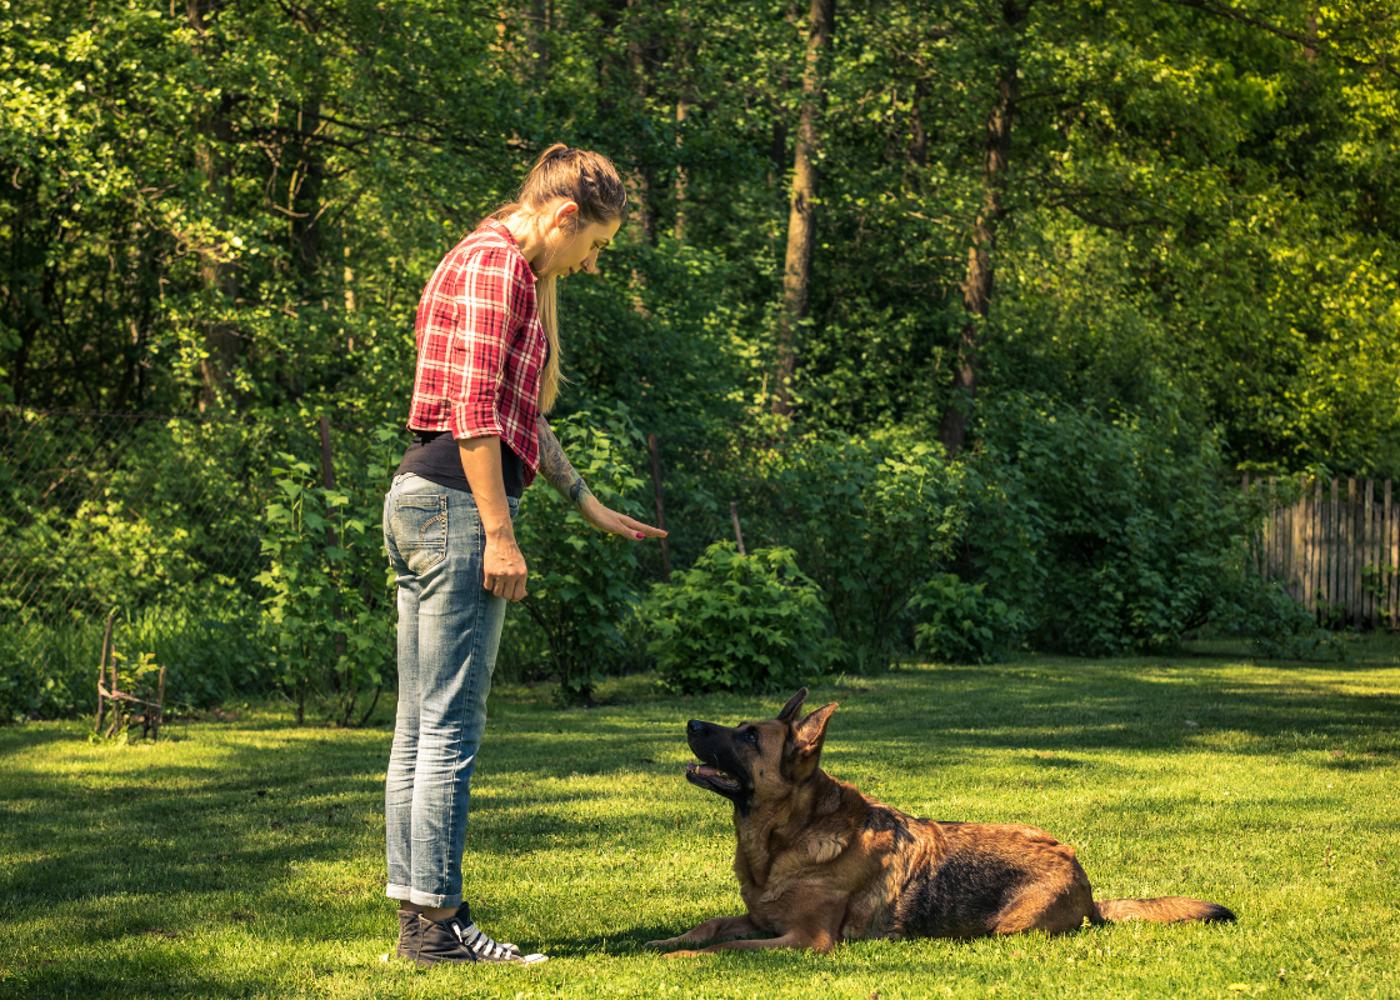 An obedient dog following its owner's commands with dog training help from Dog Training Elite of Southwest Florida.